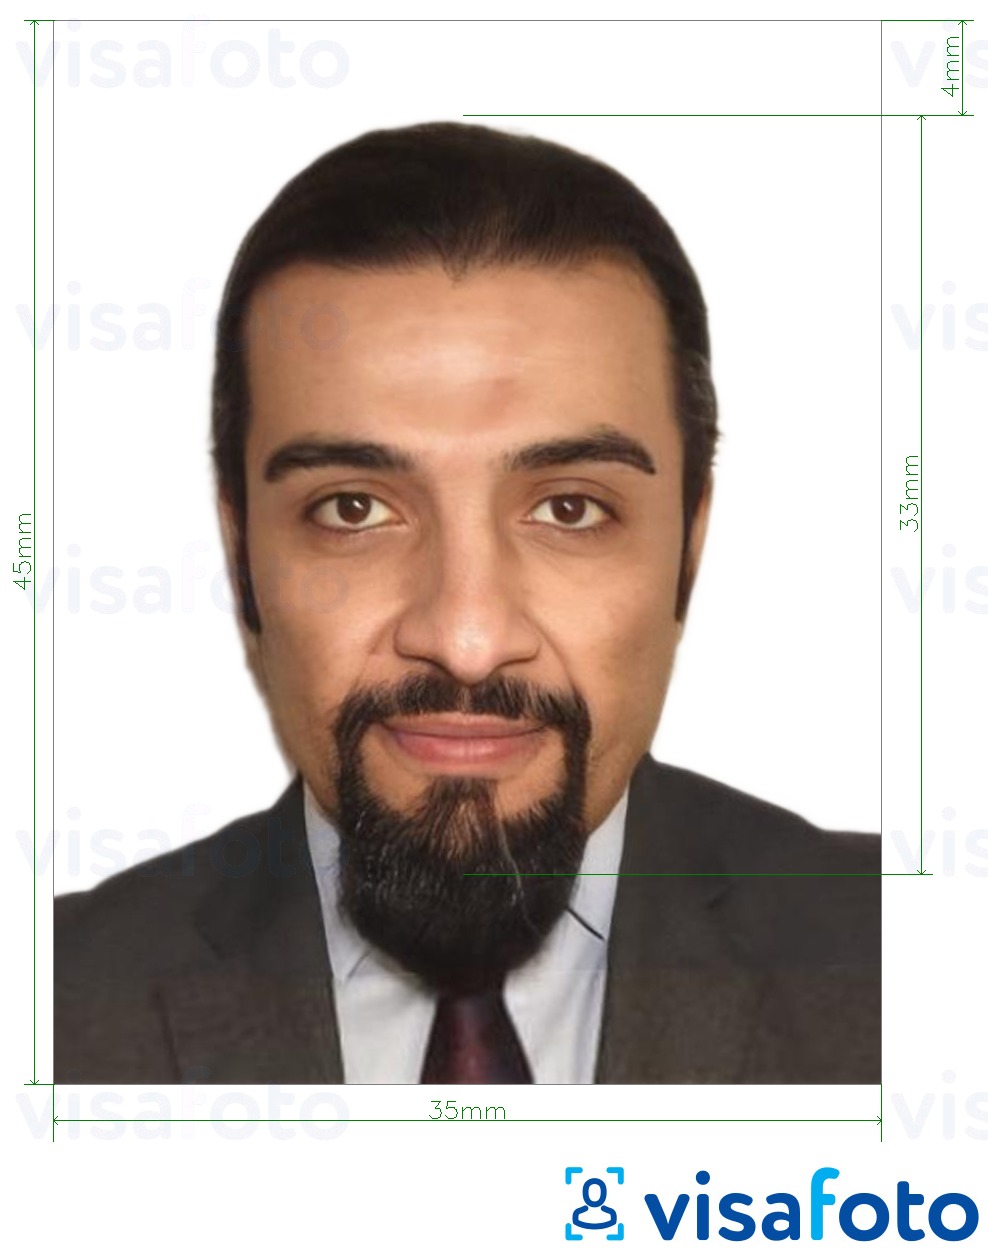 Example of photo for Jordan work permit 3.5x4.5 cm (35x45 mm) with exact size specification